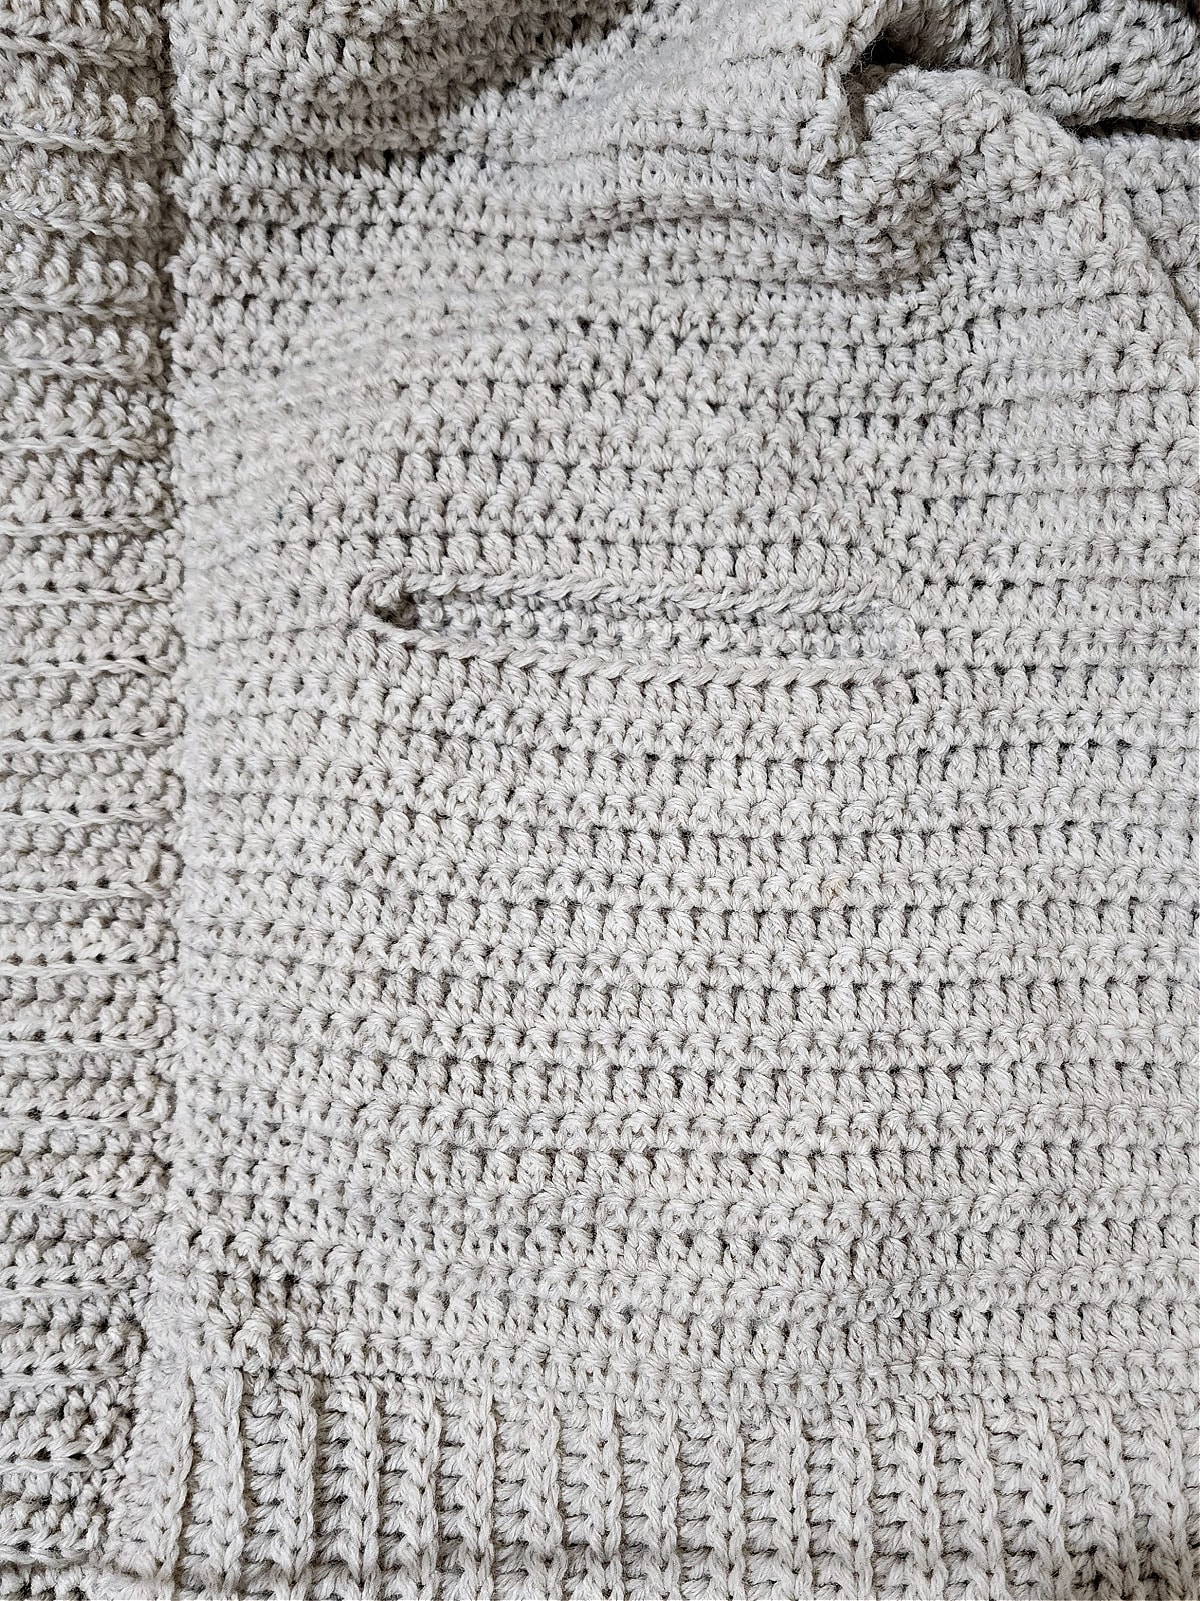 Tutorial photo shows the inset pockets attached to the crochet cardigan.